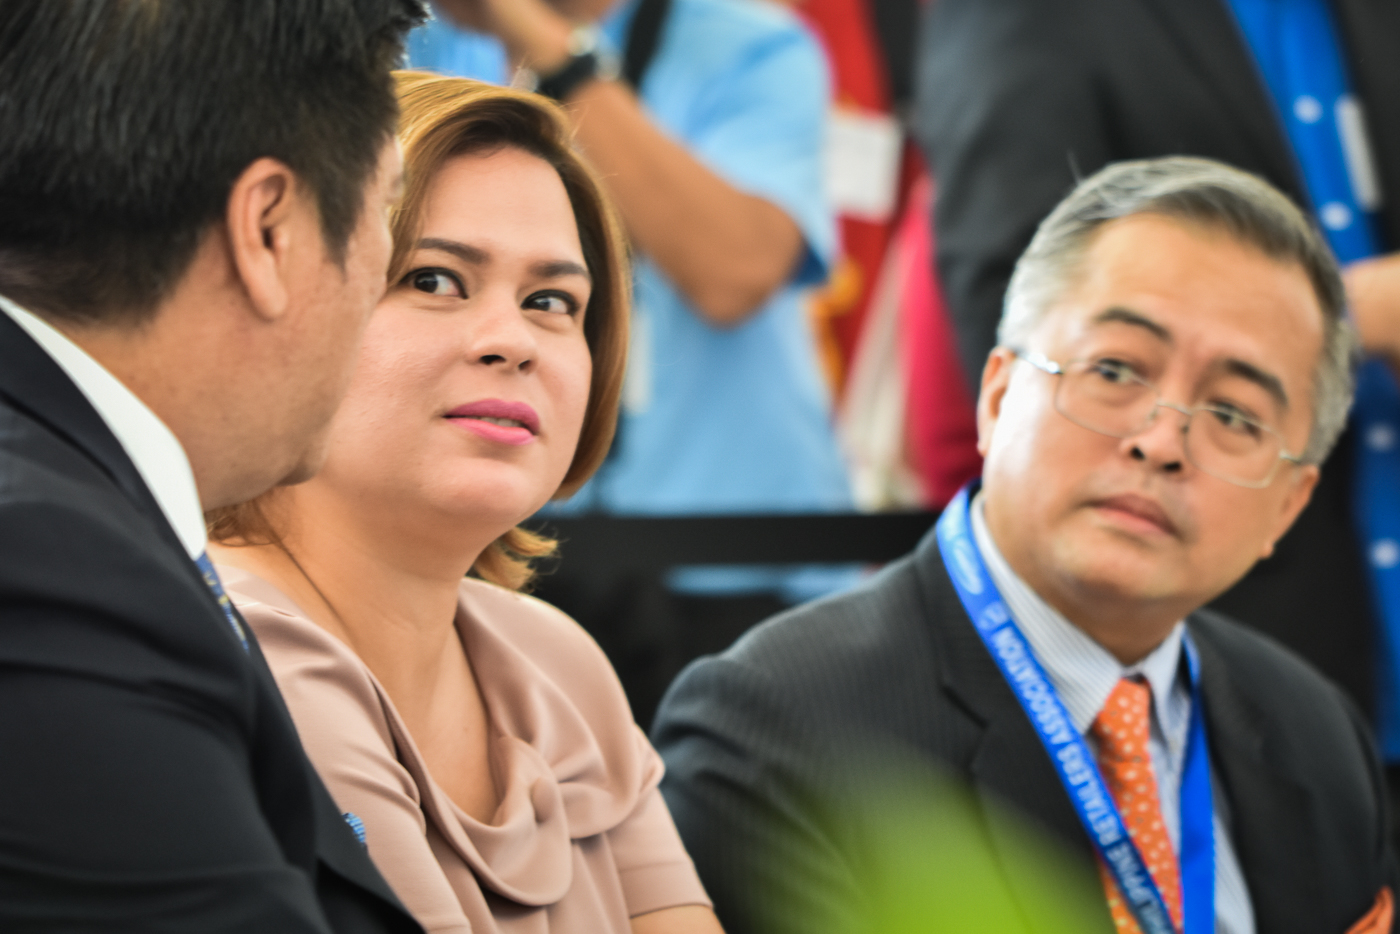 IMPORTANCE OF RETAIL. Davao City Mayor Sara Duterte-Carpio (center) sits next to PRA president Paul Santos during the opening of Stores Asia Expo on August 10, 2017. Duterte-Carpio emphasized the importance of retail to what is very much a consumption-driven economy. Photo by LeAnne Jazul/Rappler 